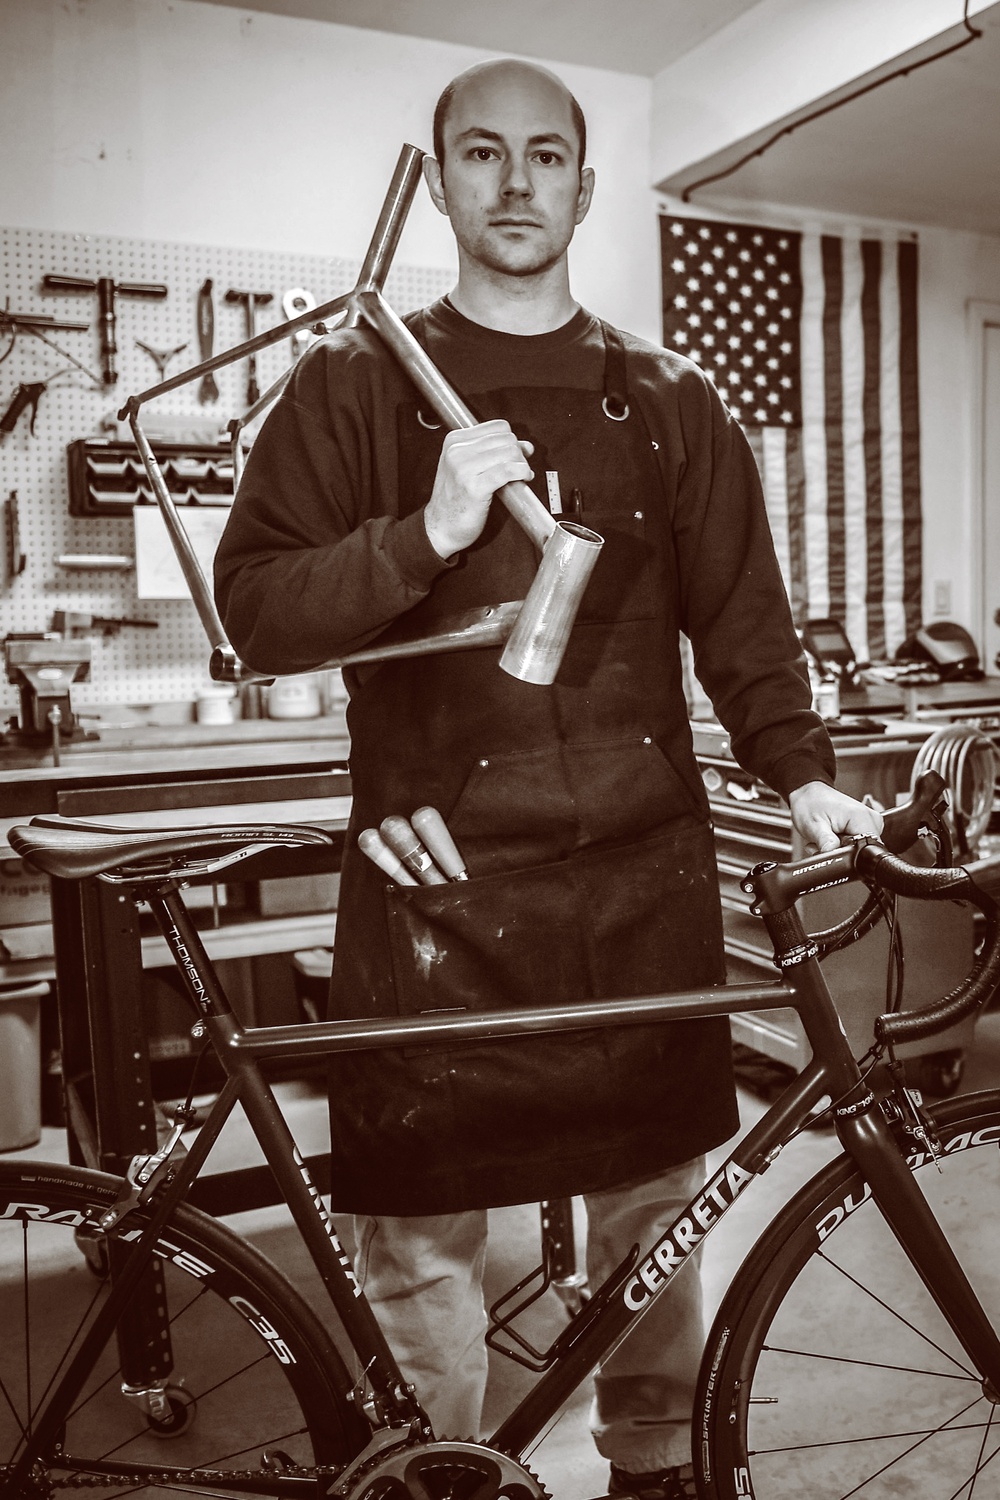 Airman specializes in handcrafted bicycle frames